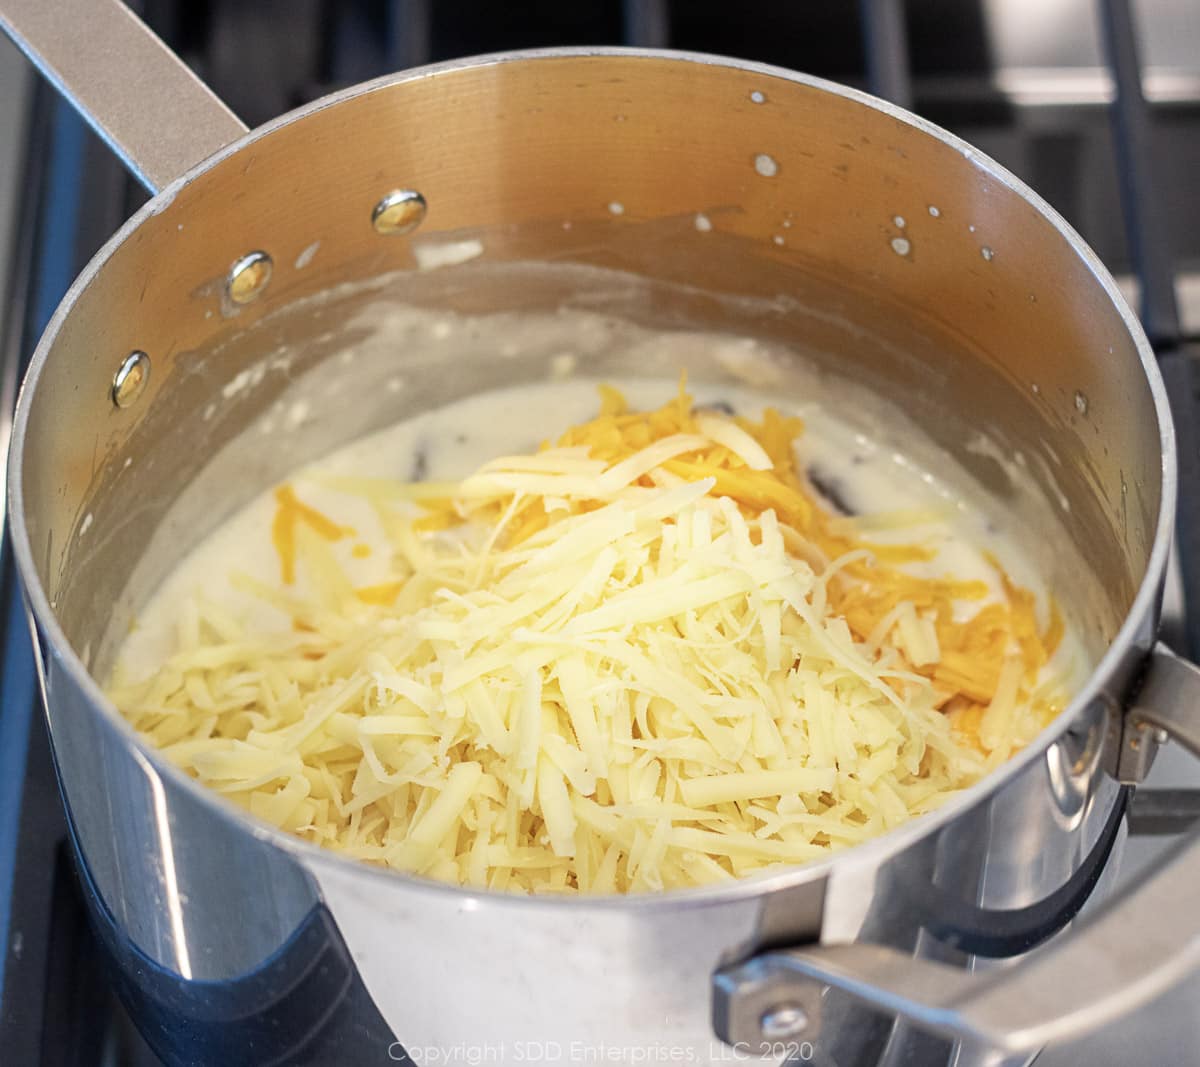 cheddar and gruyere cheeses added to a bechamel sauce in a sauce pan